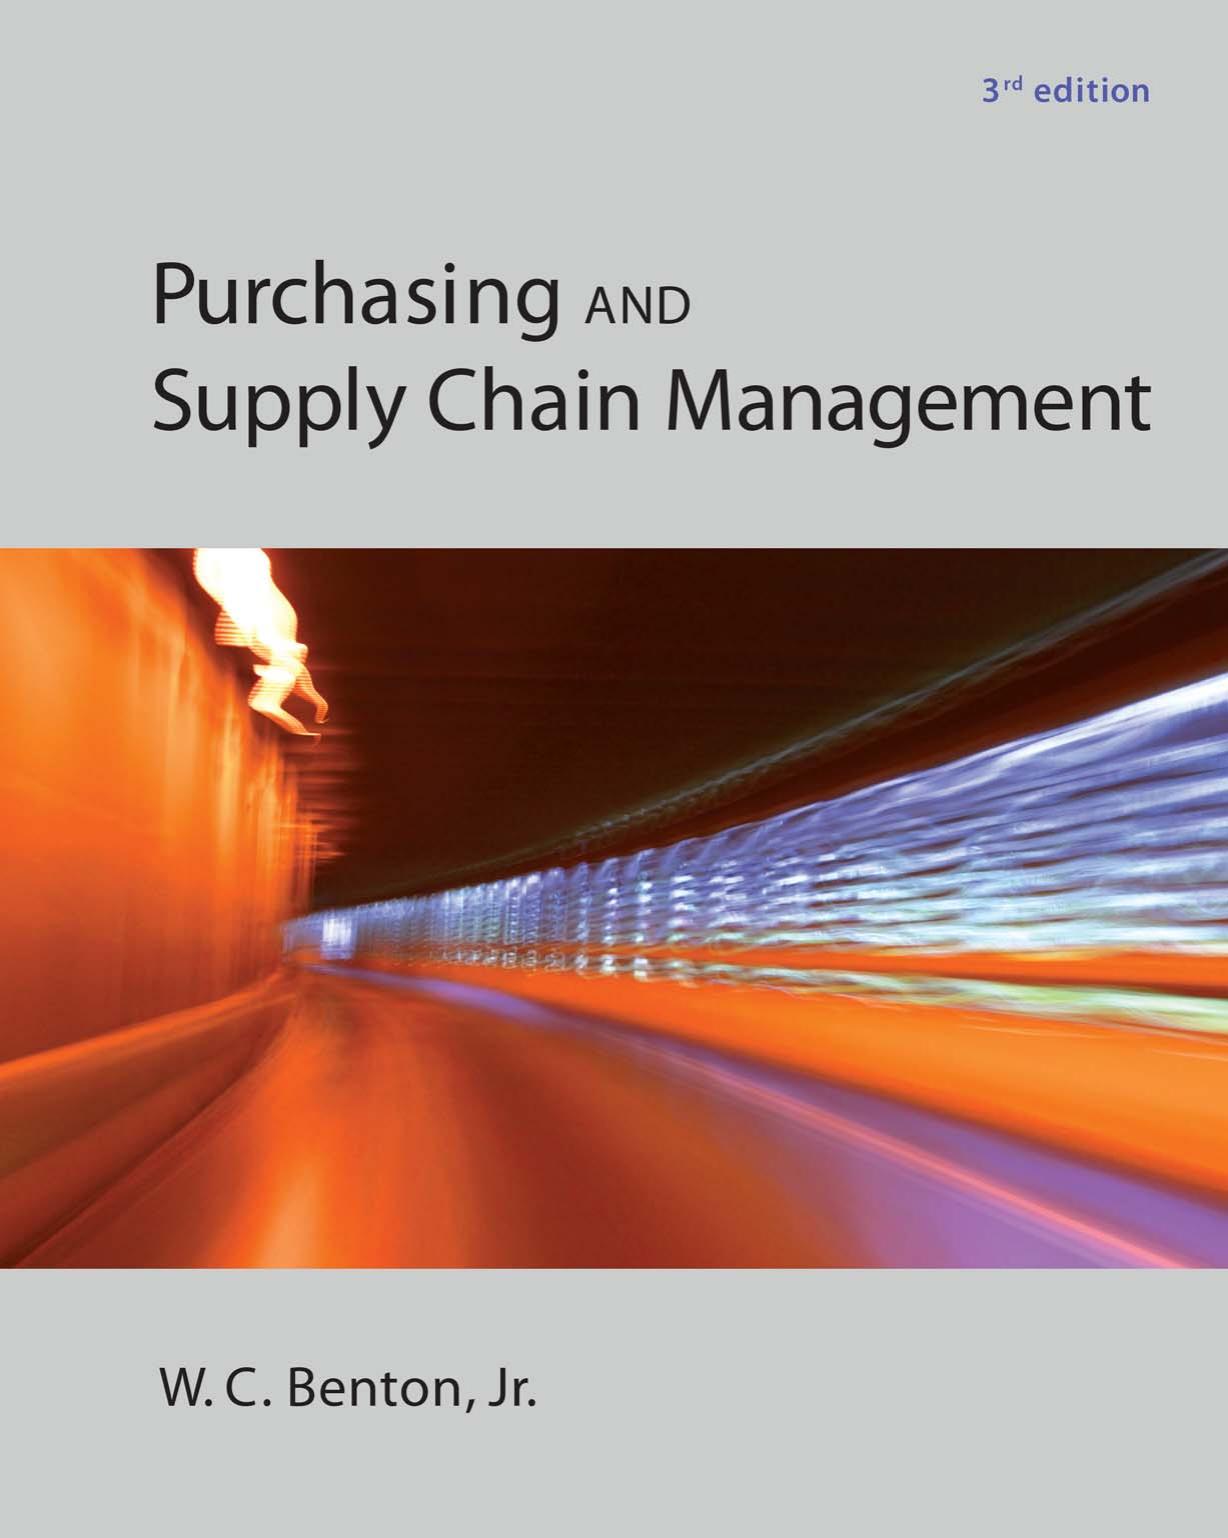 Purchasing and Supply Chain Management (McGraw-Hill/Irwin Series in Operations and Decision Sciences) by W.C. Benton